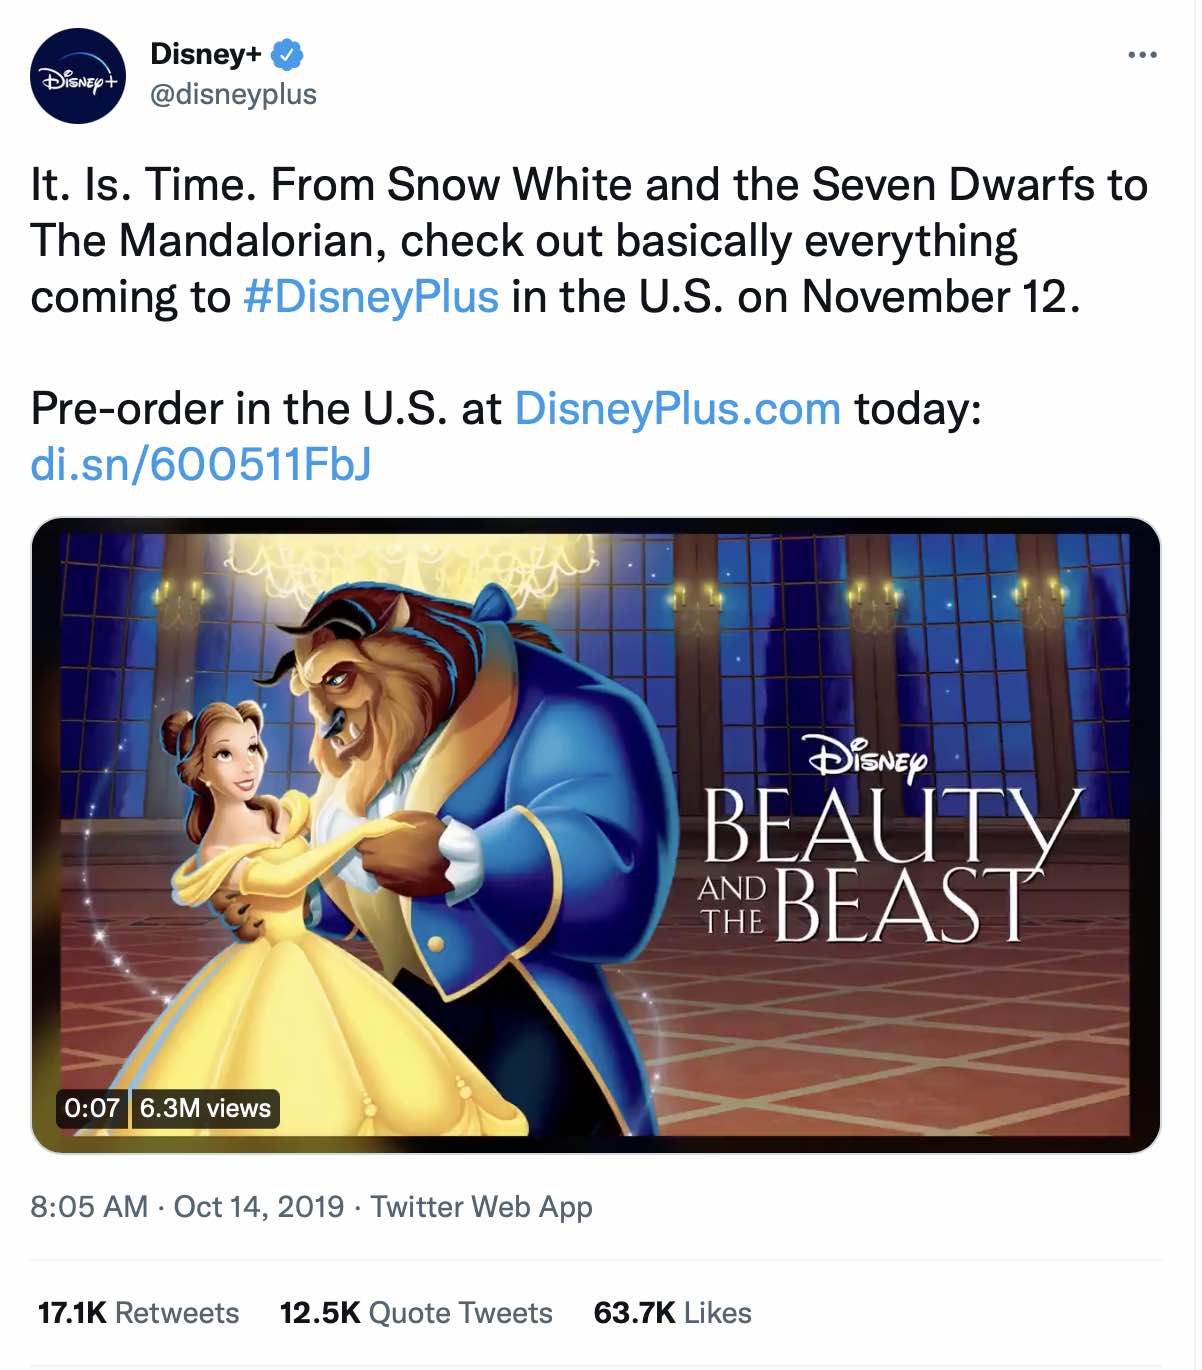 This tweet from Disney+ explains benefits of subscribing: "From Snow White and the Seven Dwards to The Mandalorian."